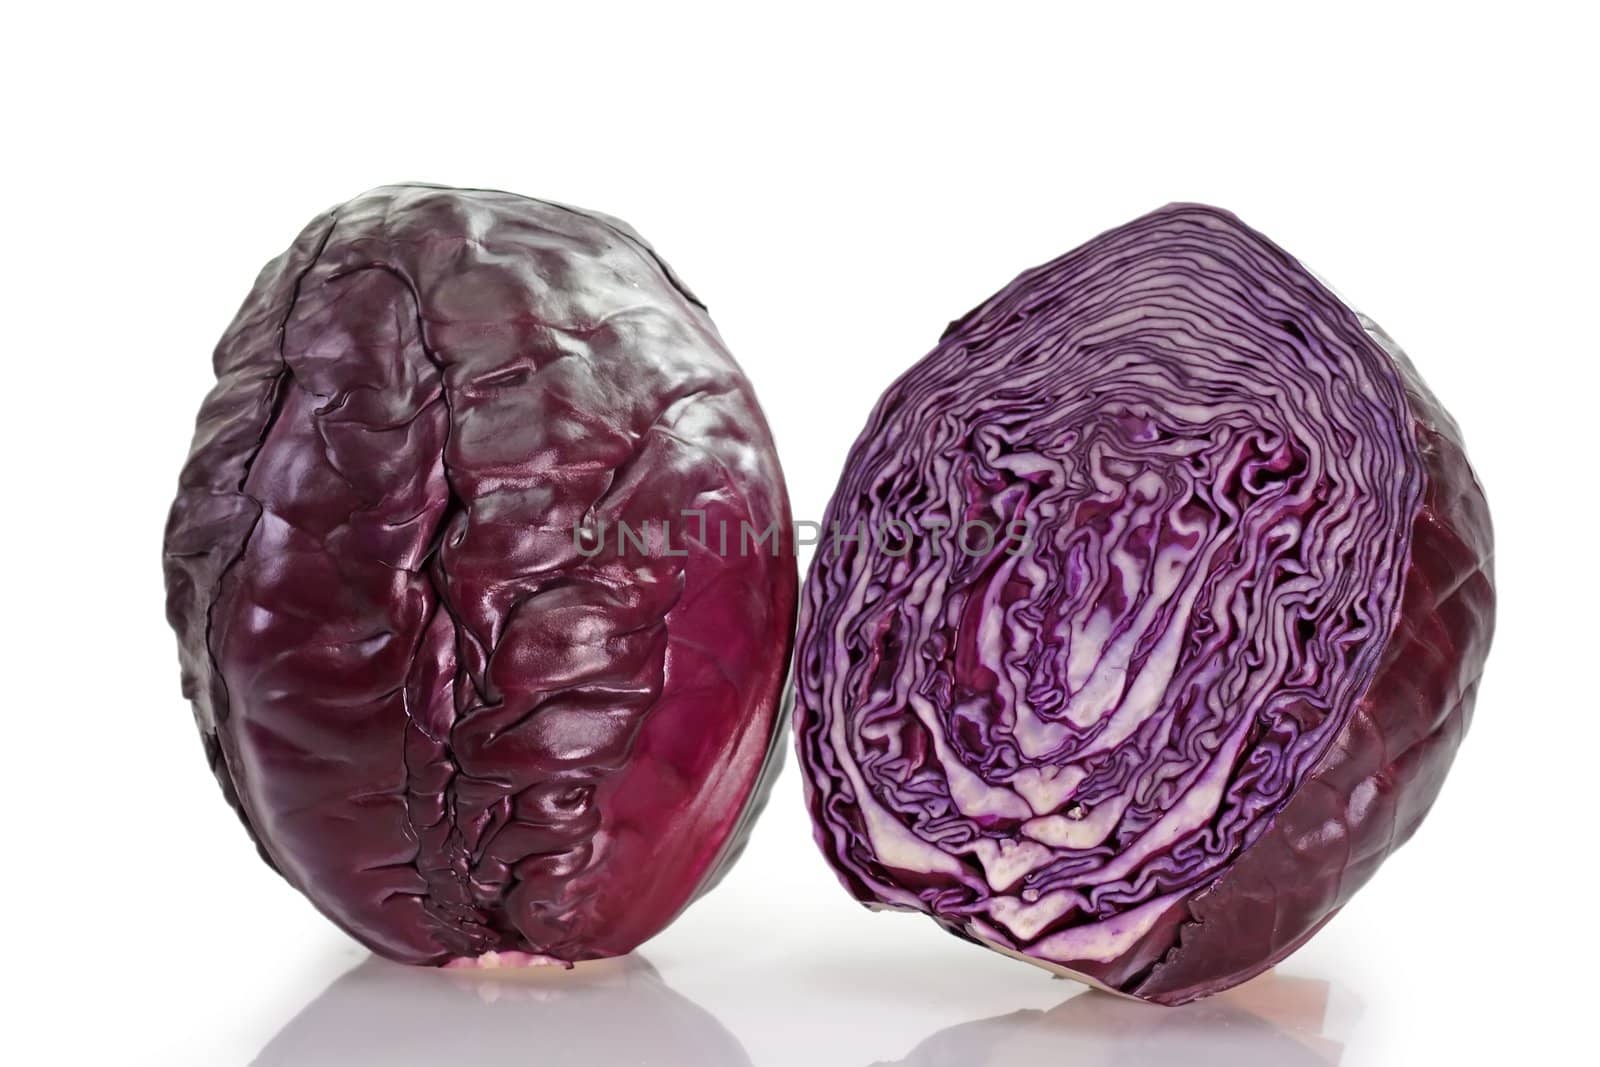 Two red cabbages on light background